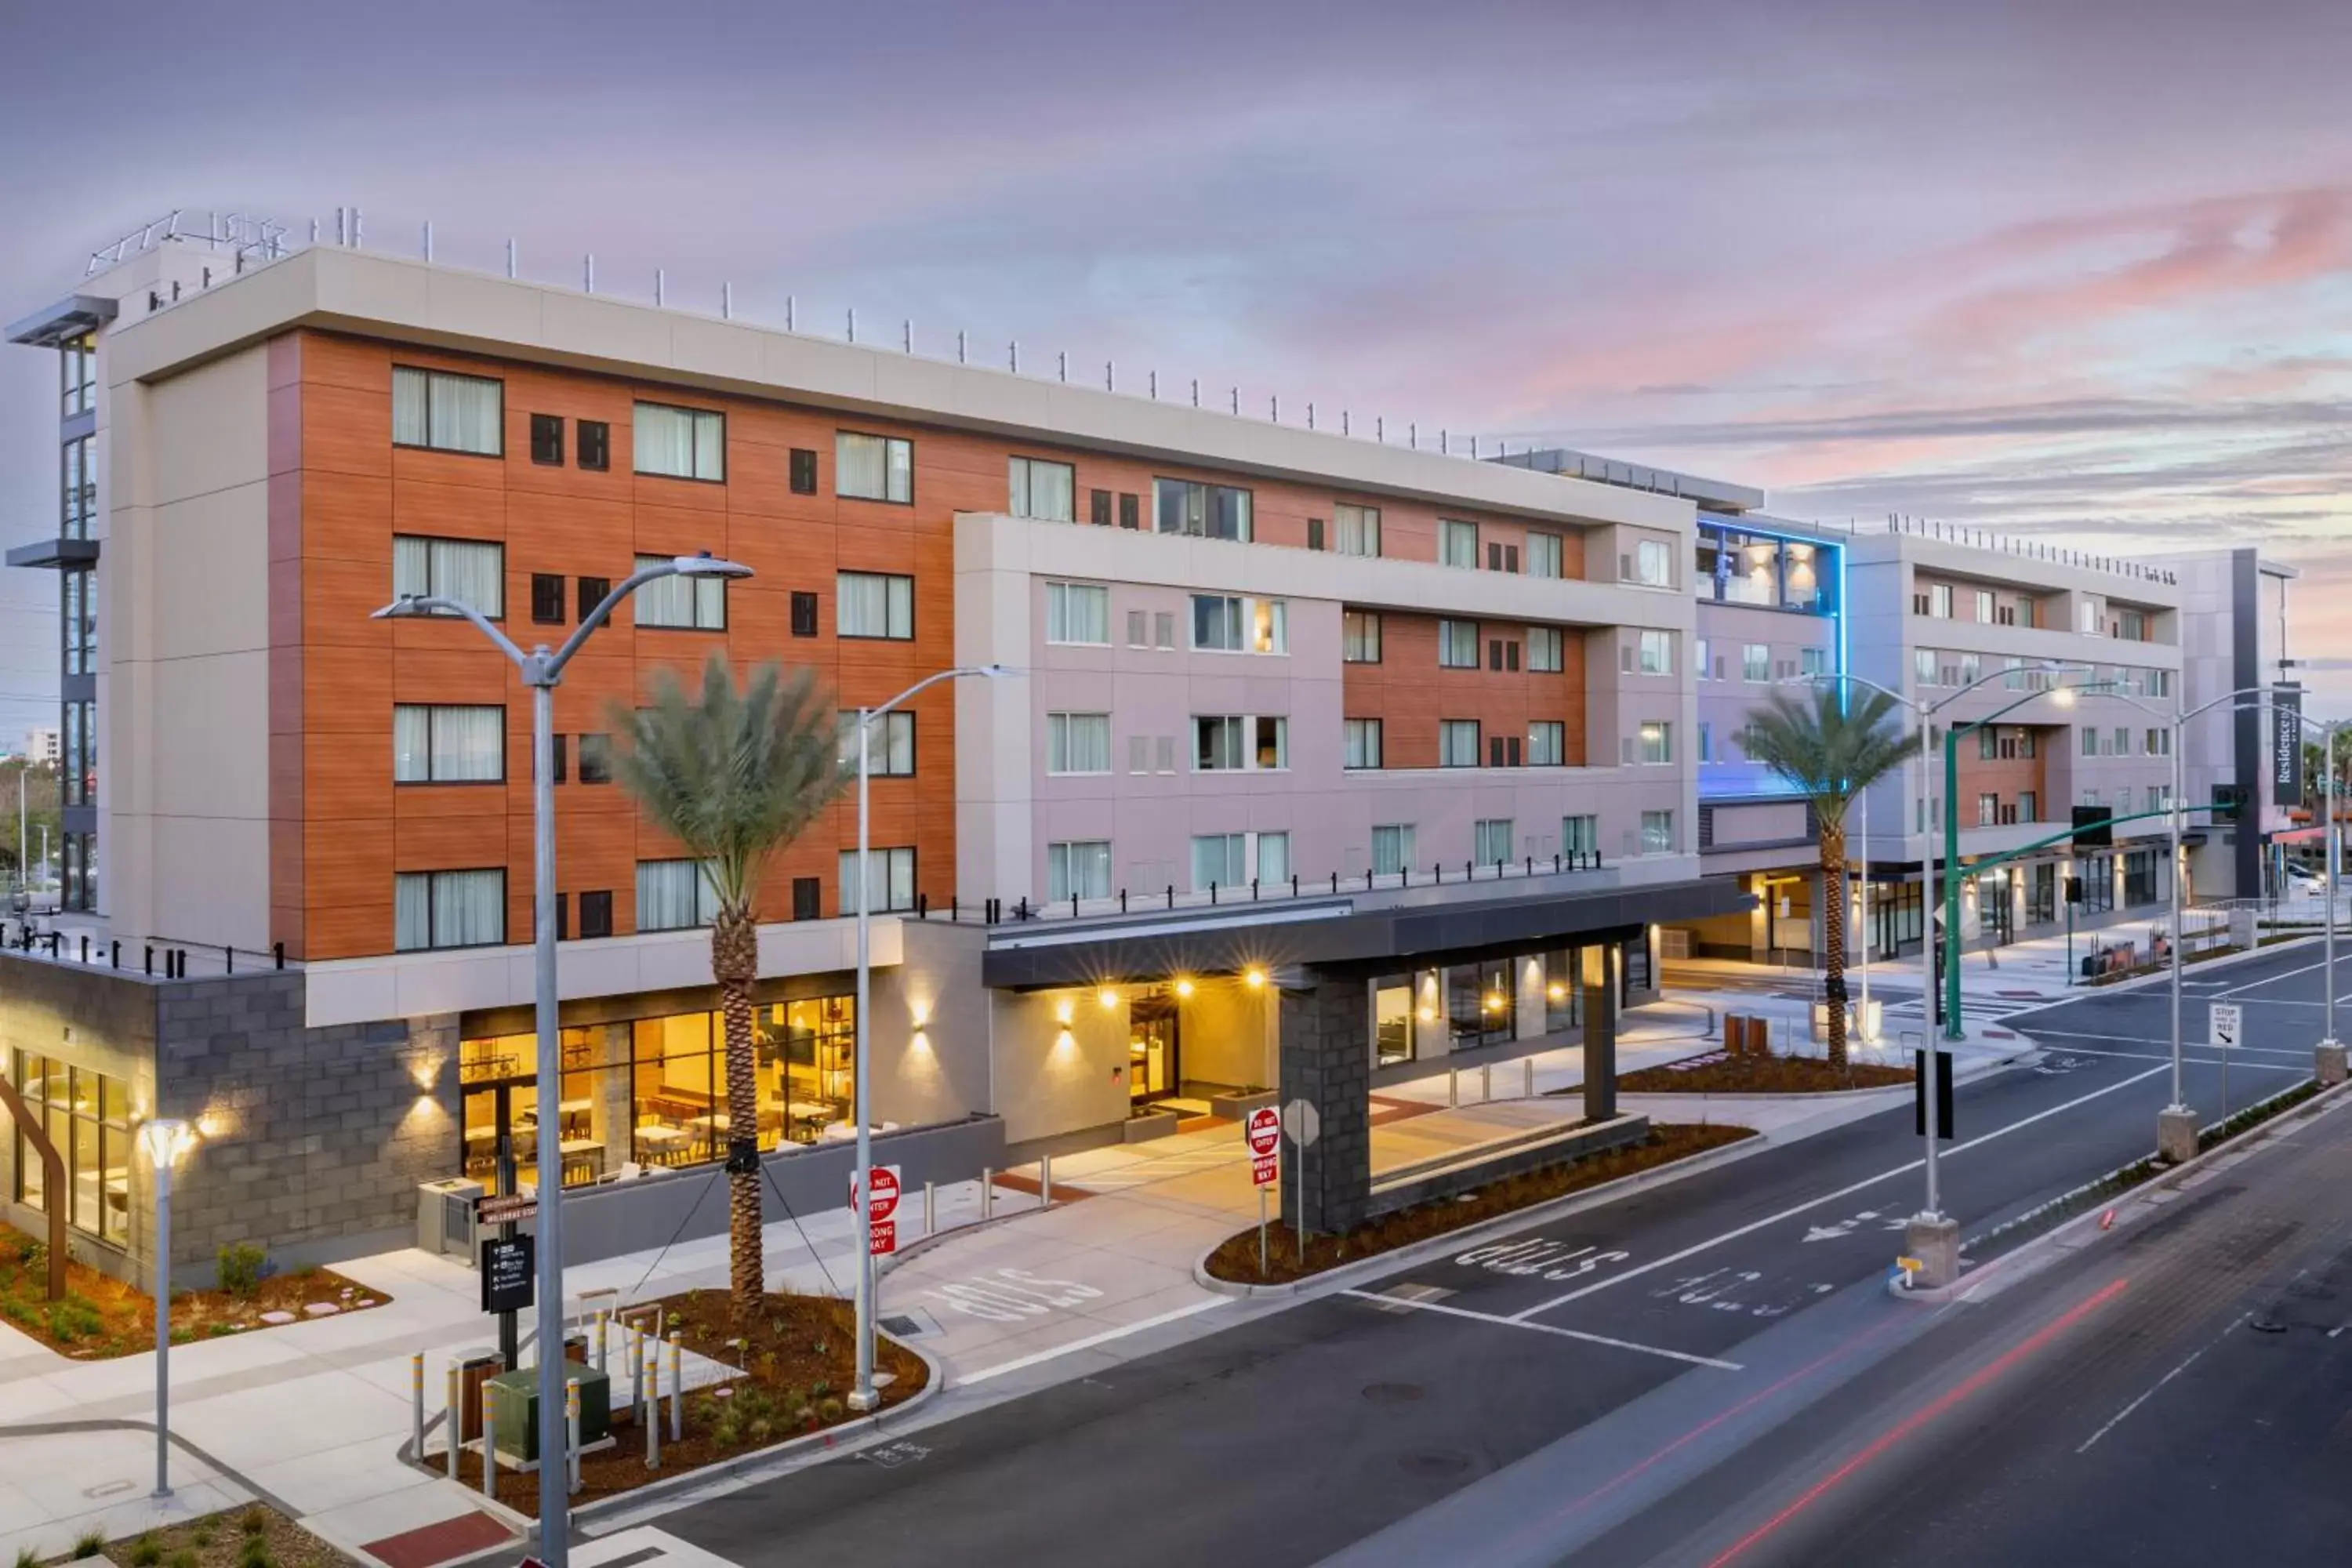 Property building in Residence Inn by Marriott San Francisco Airport Millbrae Station